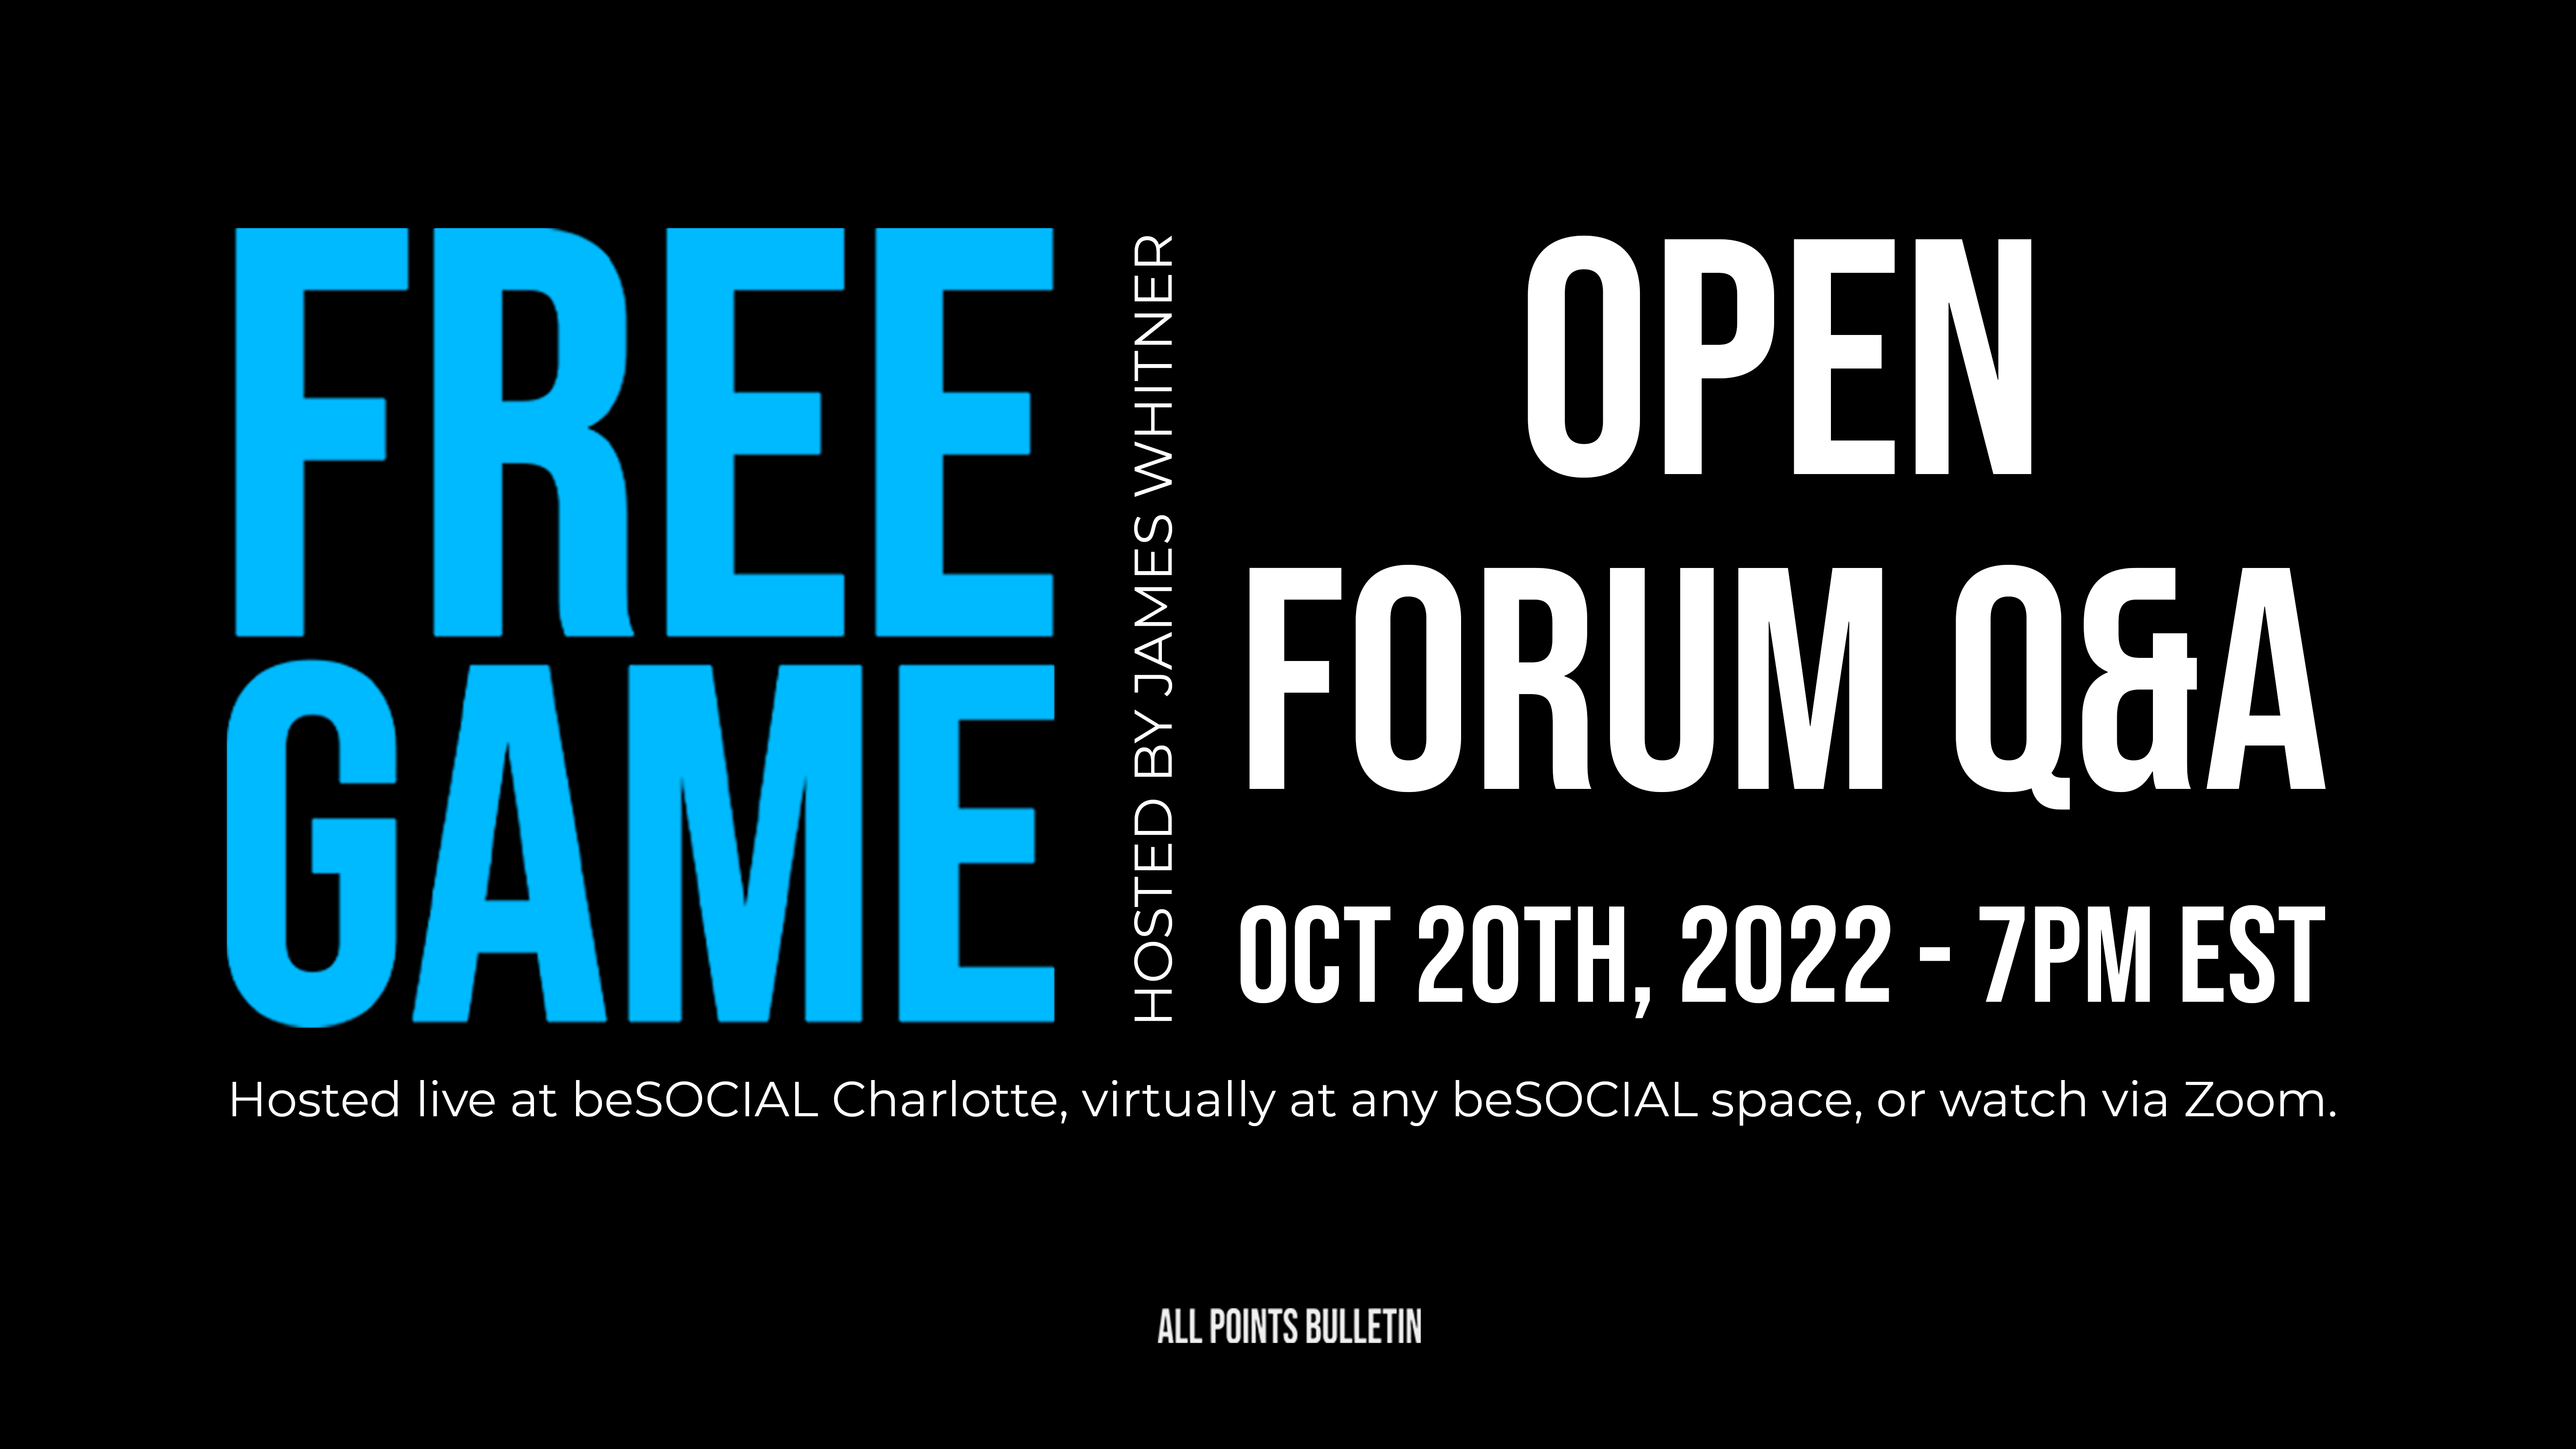 FREE GAME: OPEN FORUM